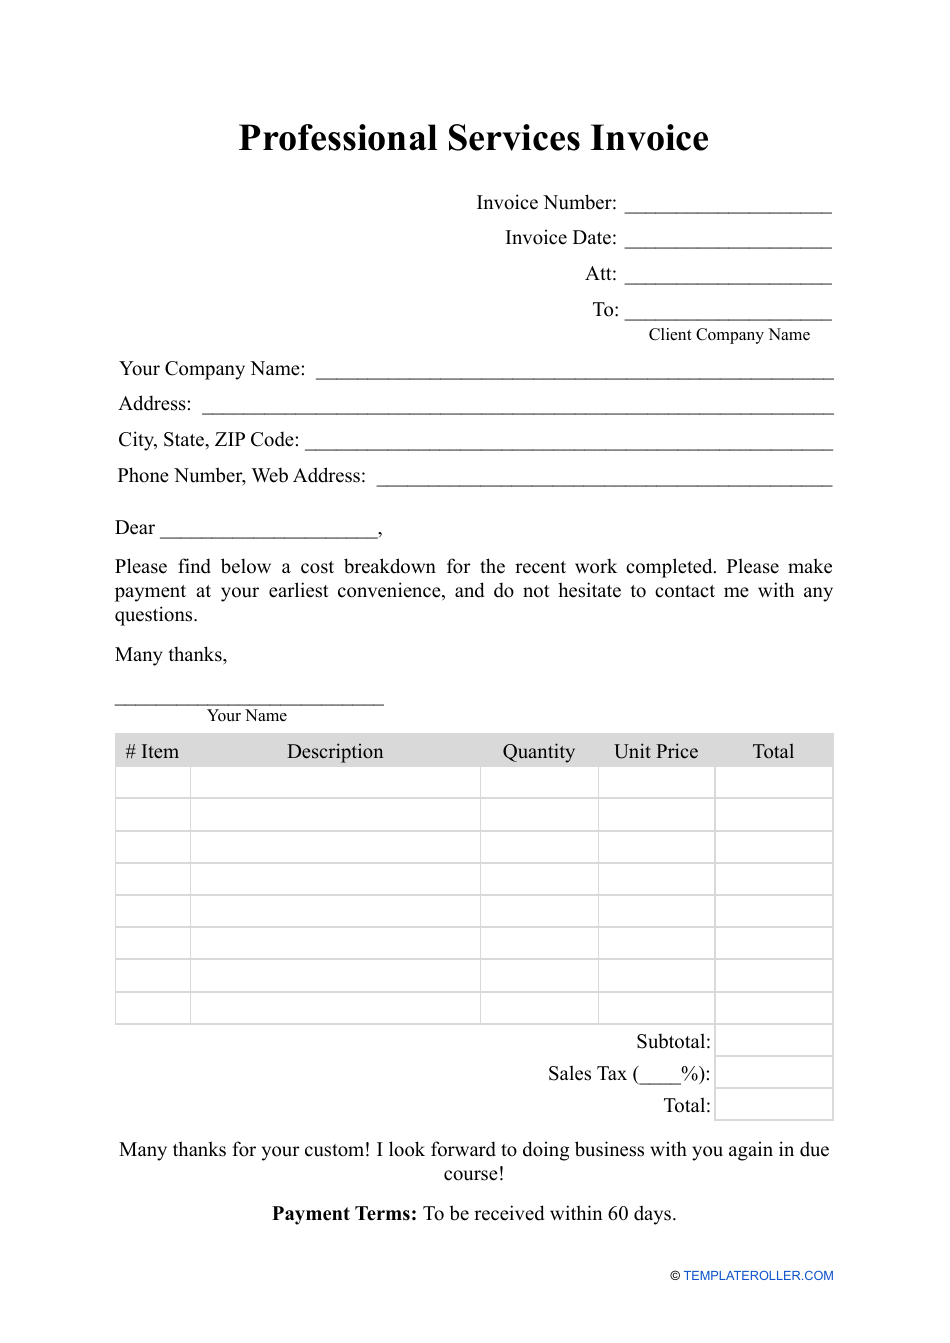 Professional Services Invoice Template, Page 1